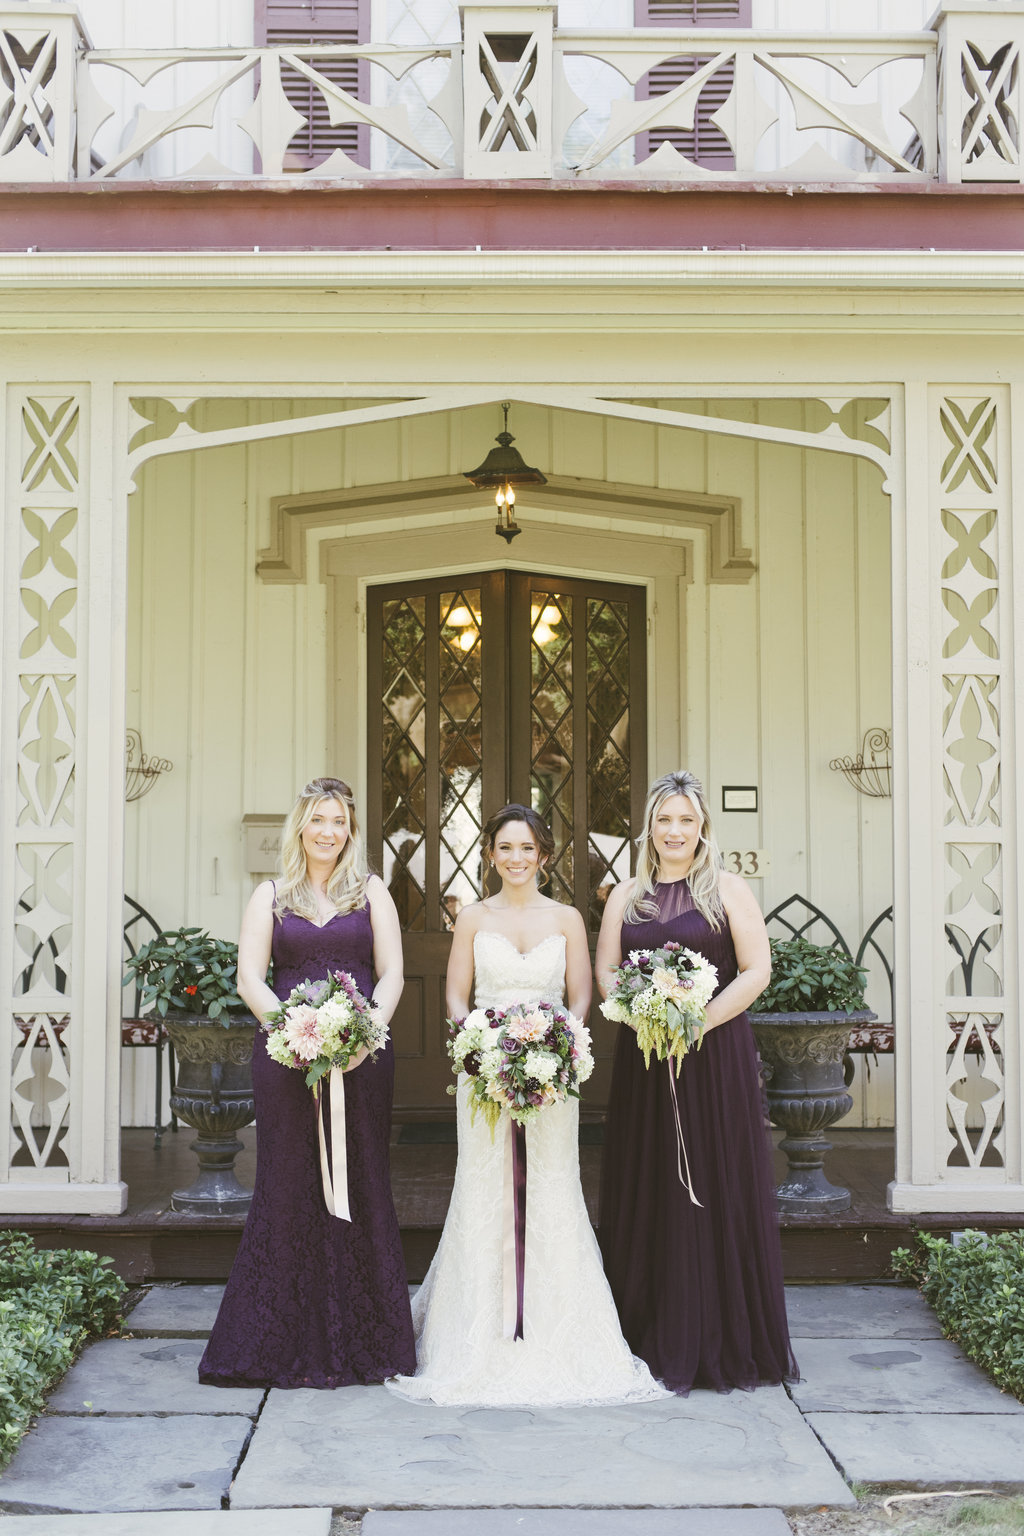 Monica-Relyea-Events-Alicia-King-Photography-Delamater-Inn-Beekman-Arms-Wedding-Rhinebeck-New-York-Hudson-Valley111